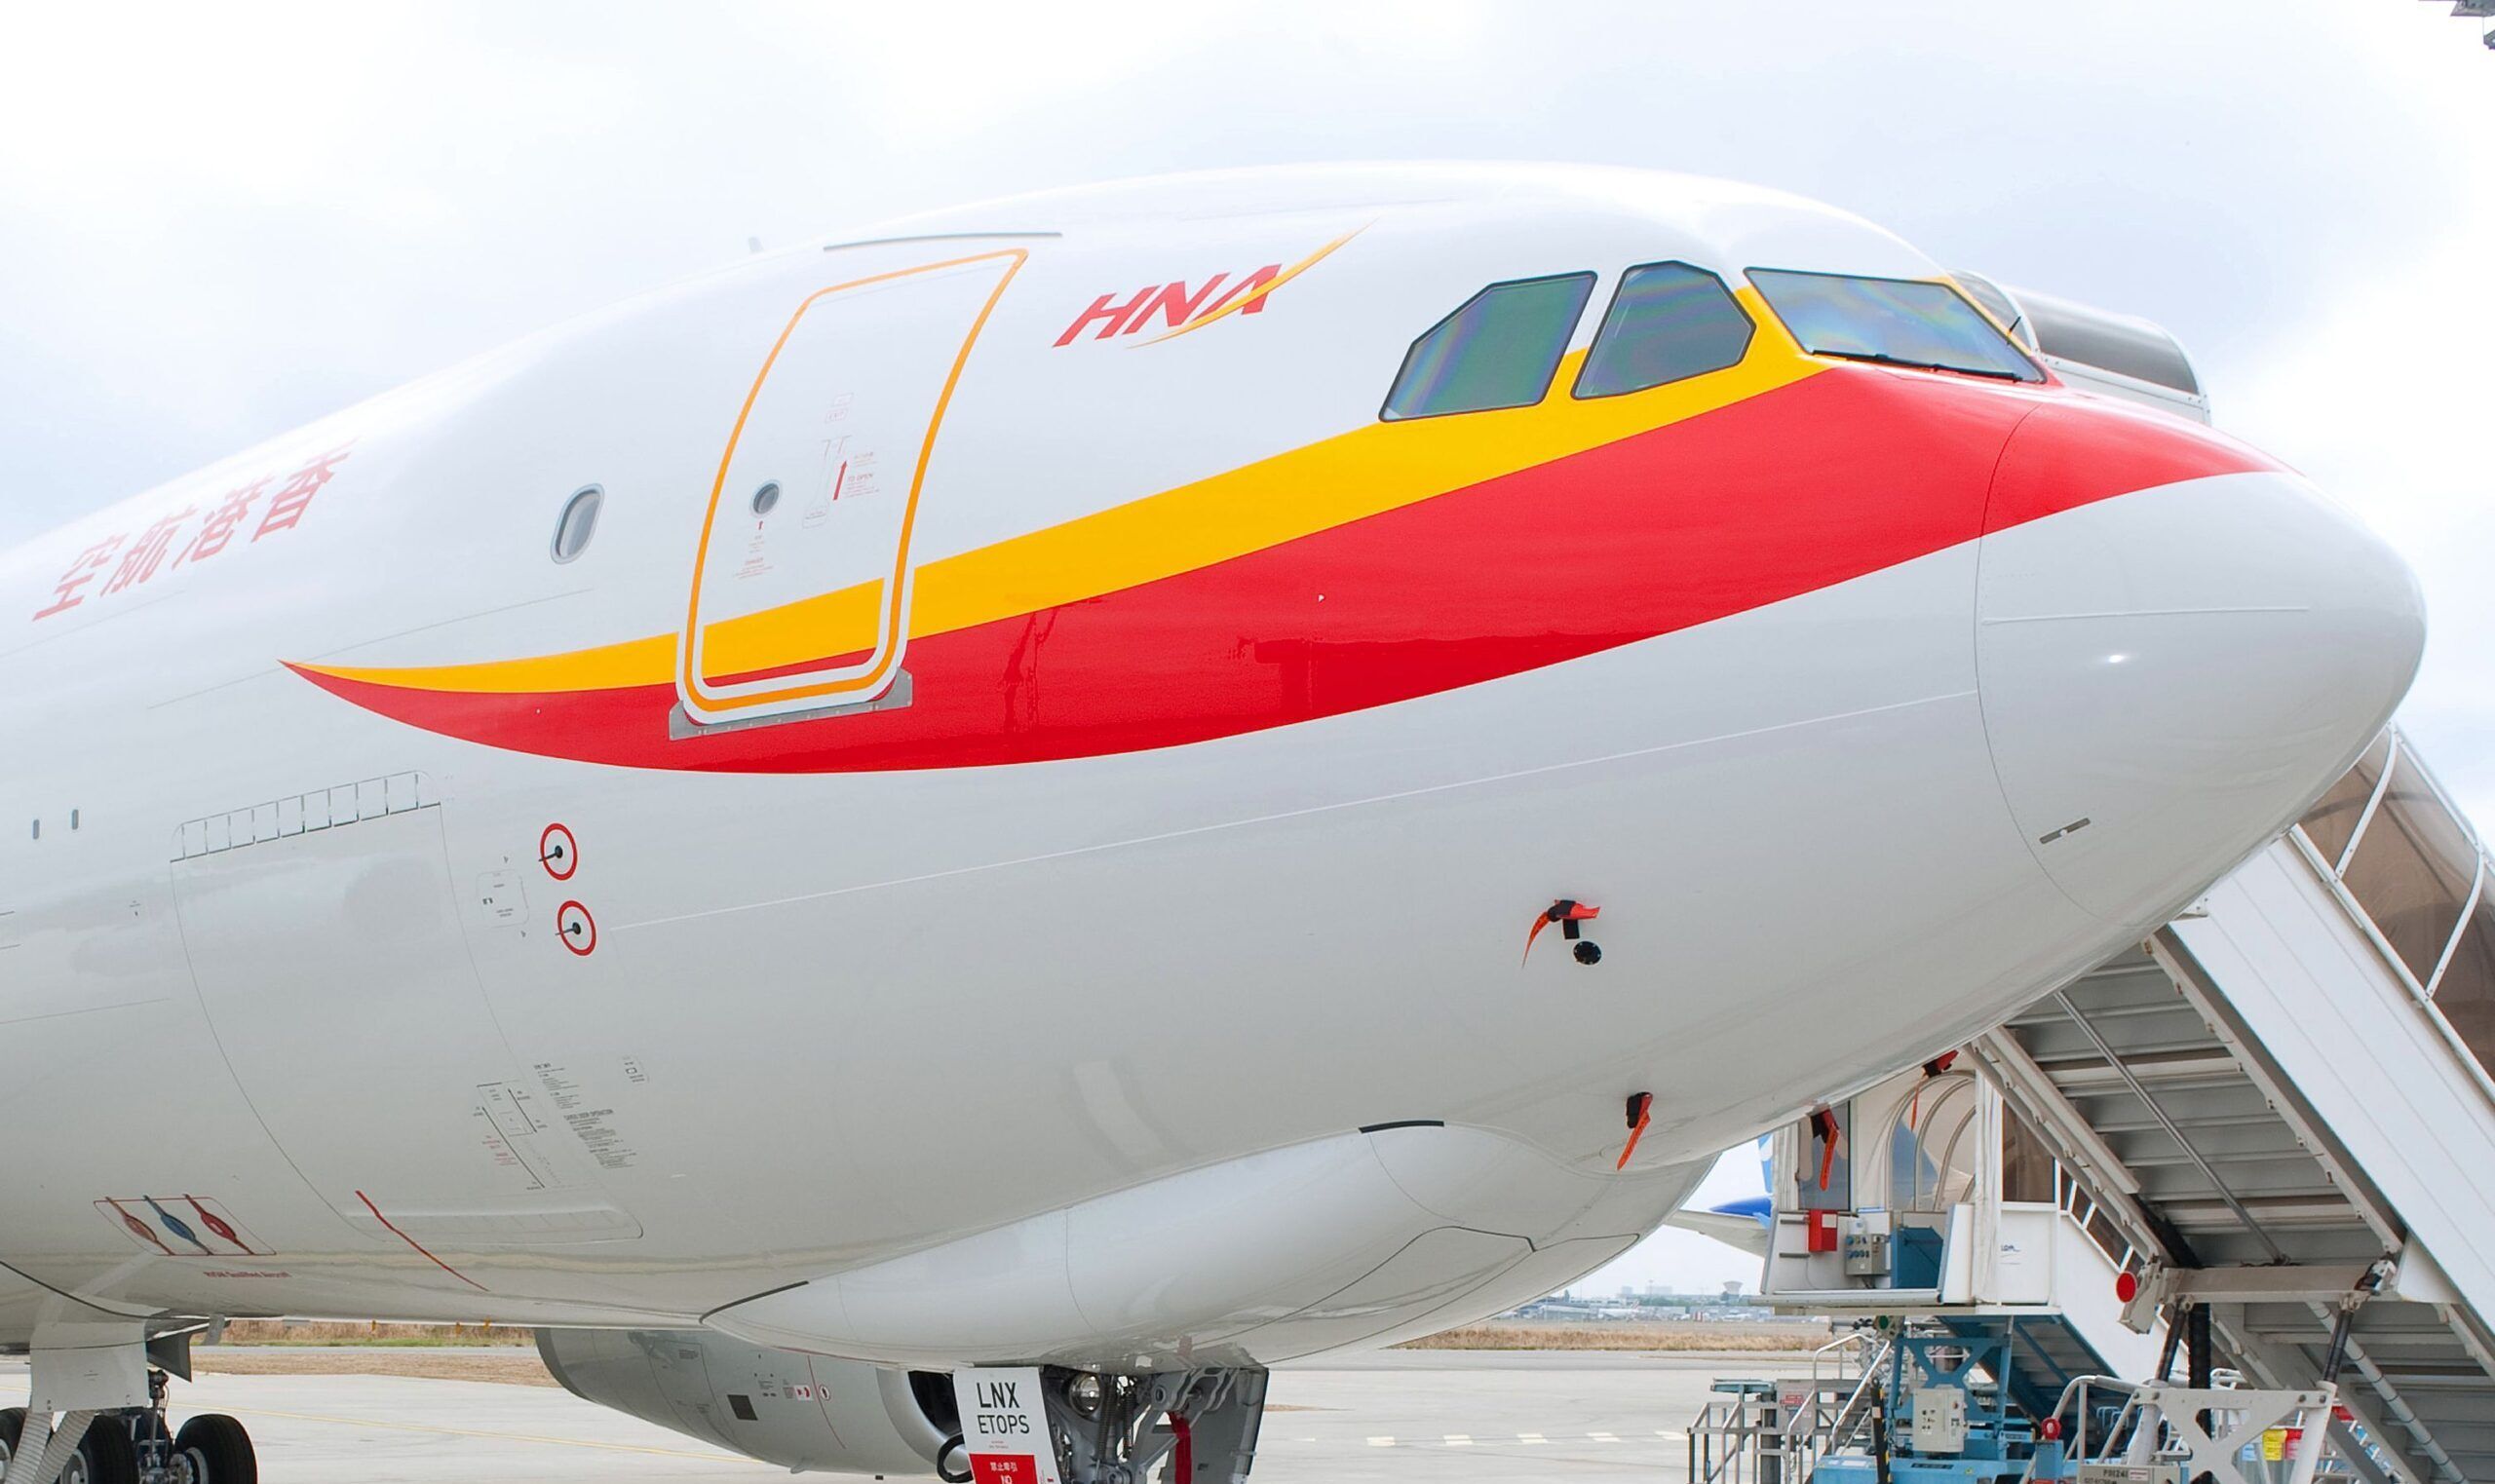 800th A330 delivered – an A330-200F for HNA Group